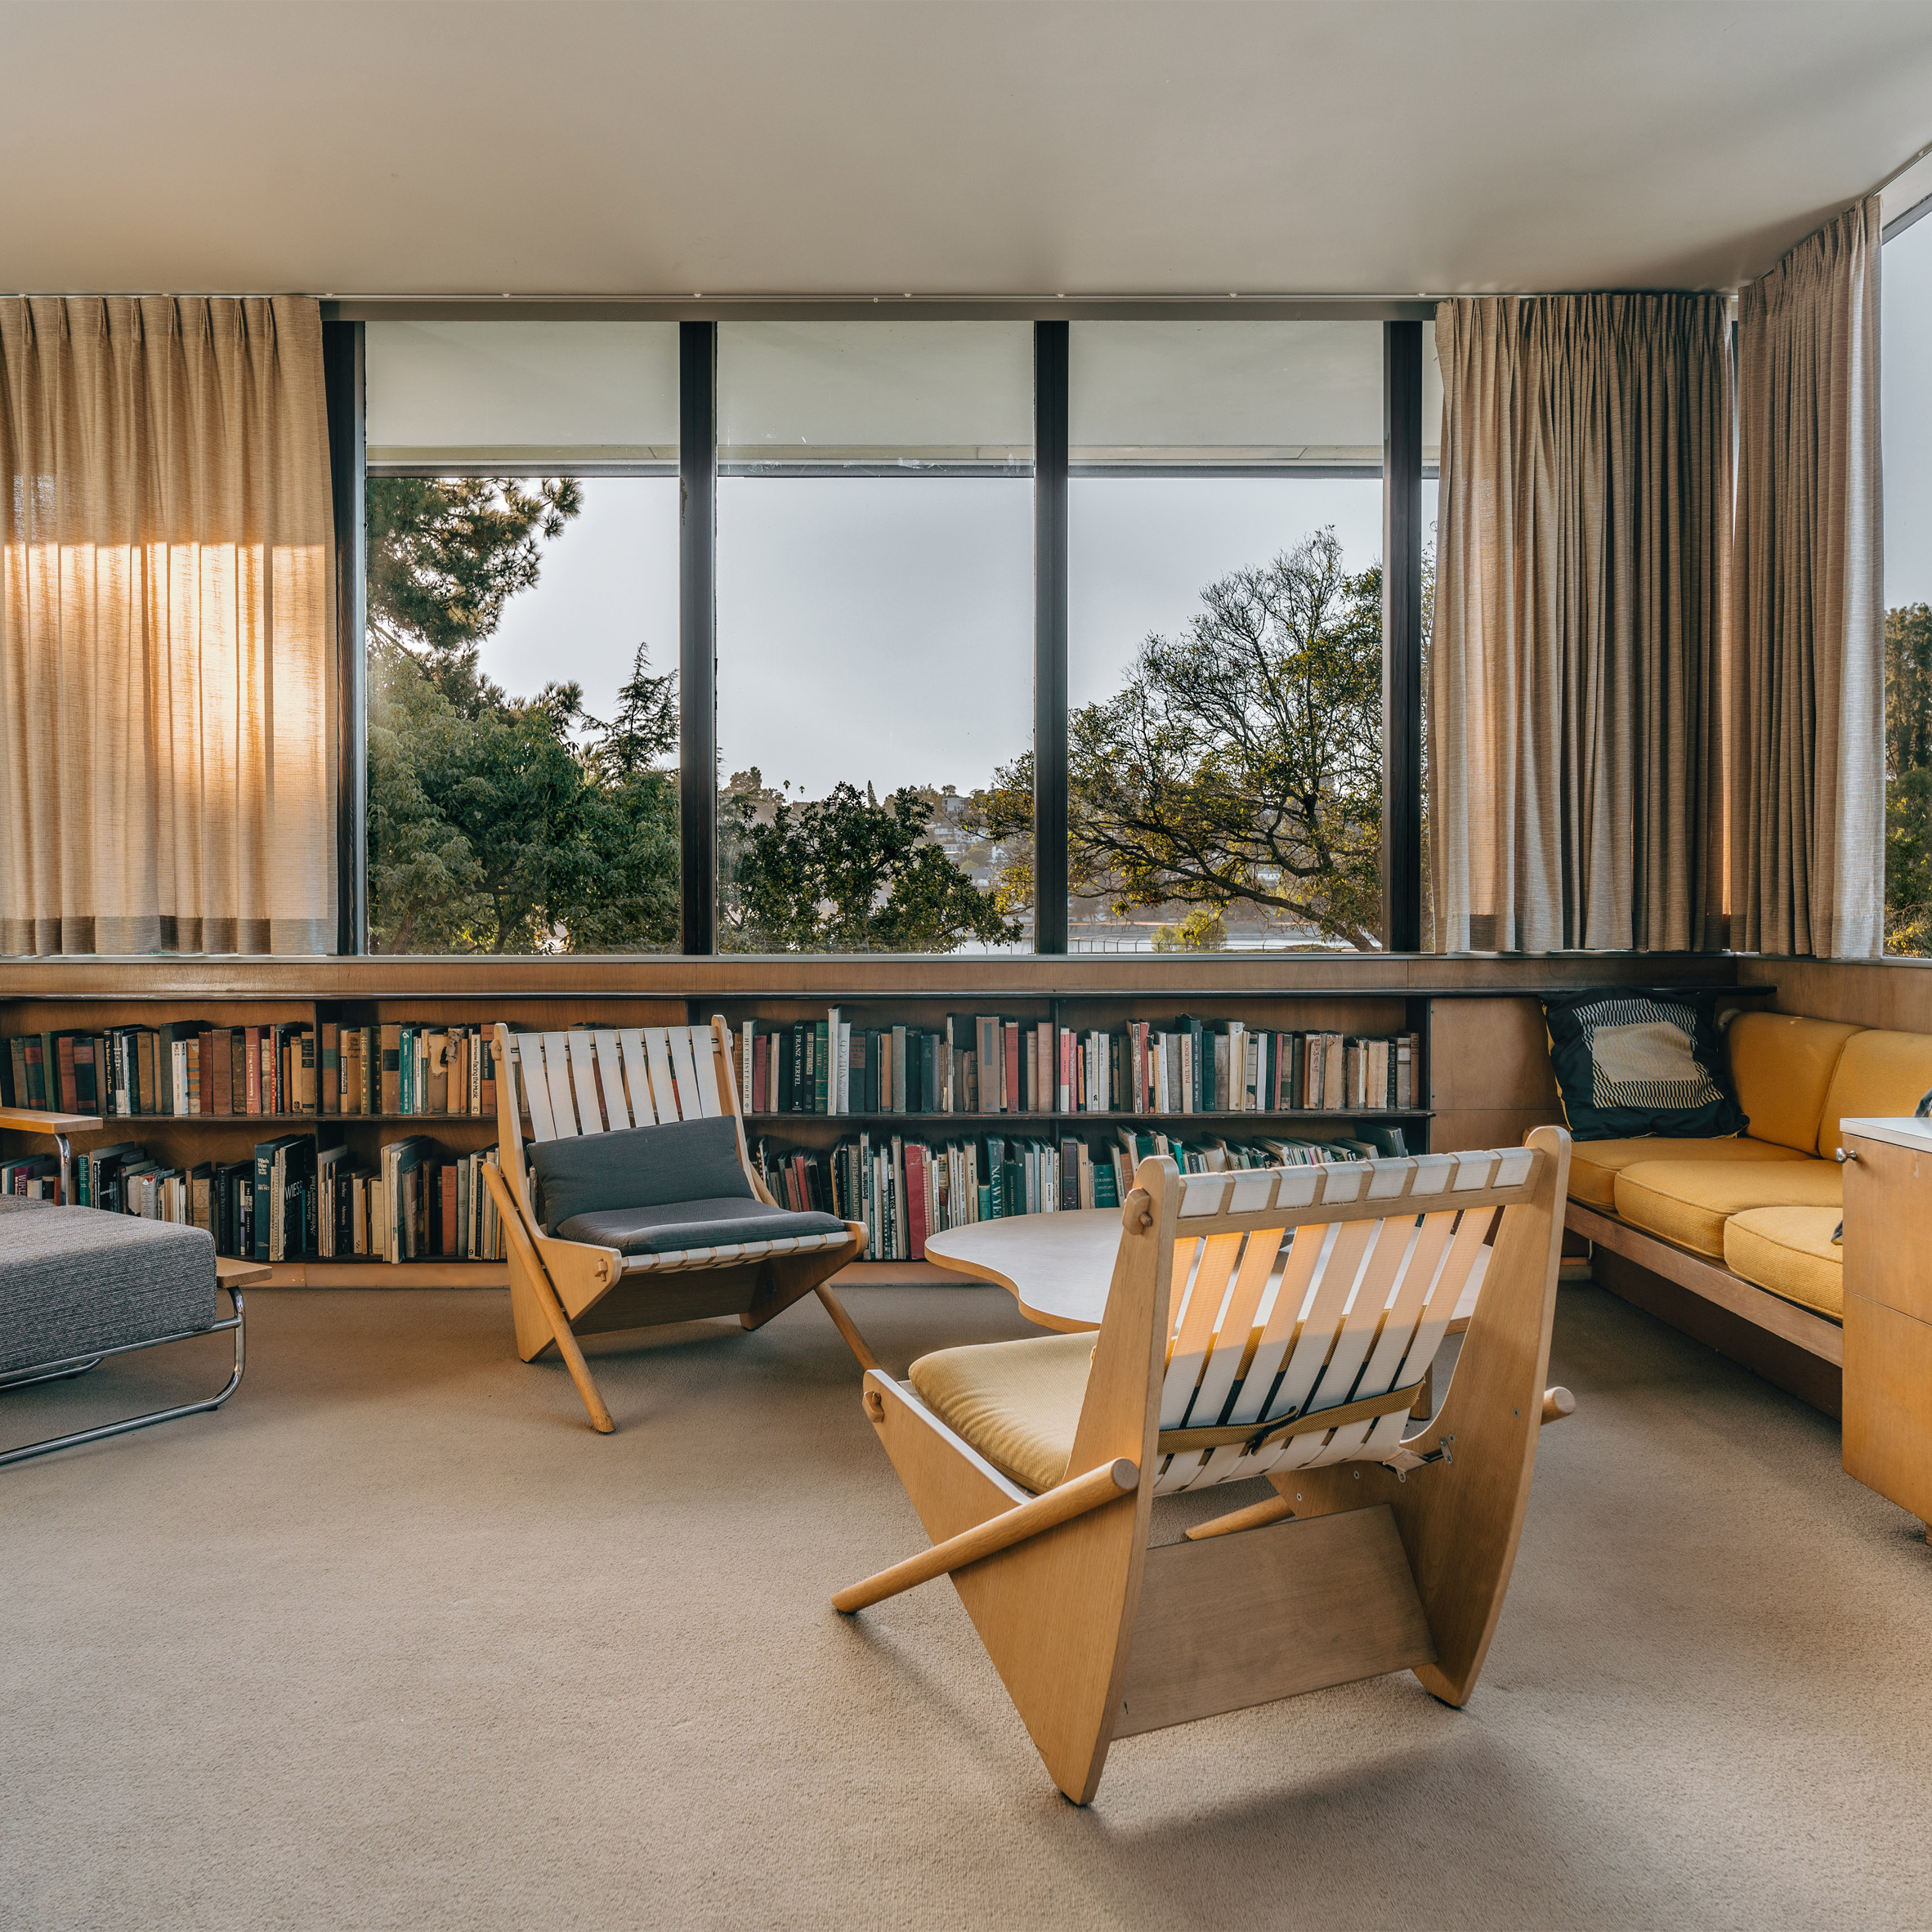 A mid-century-style living room